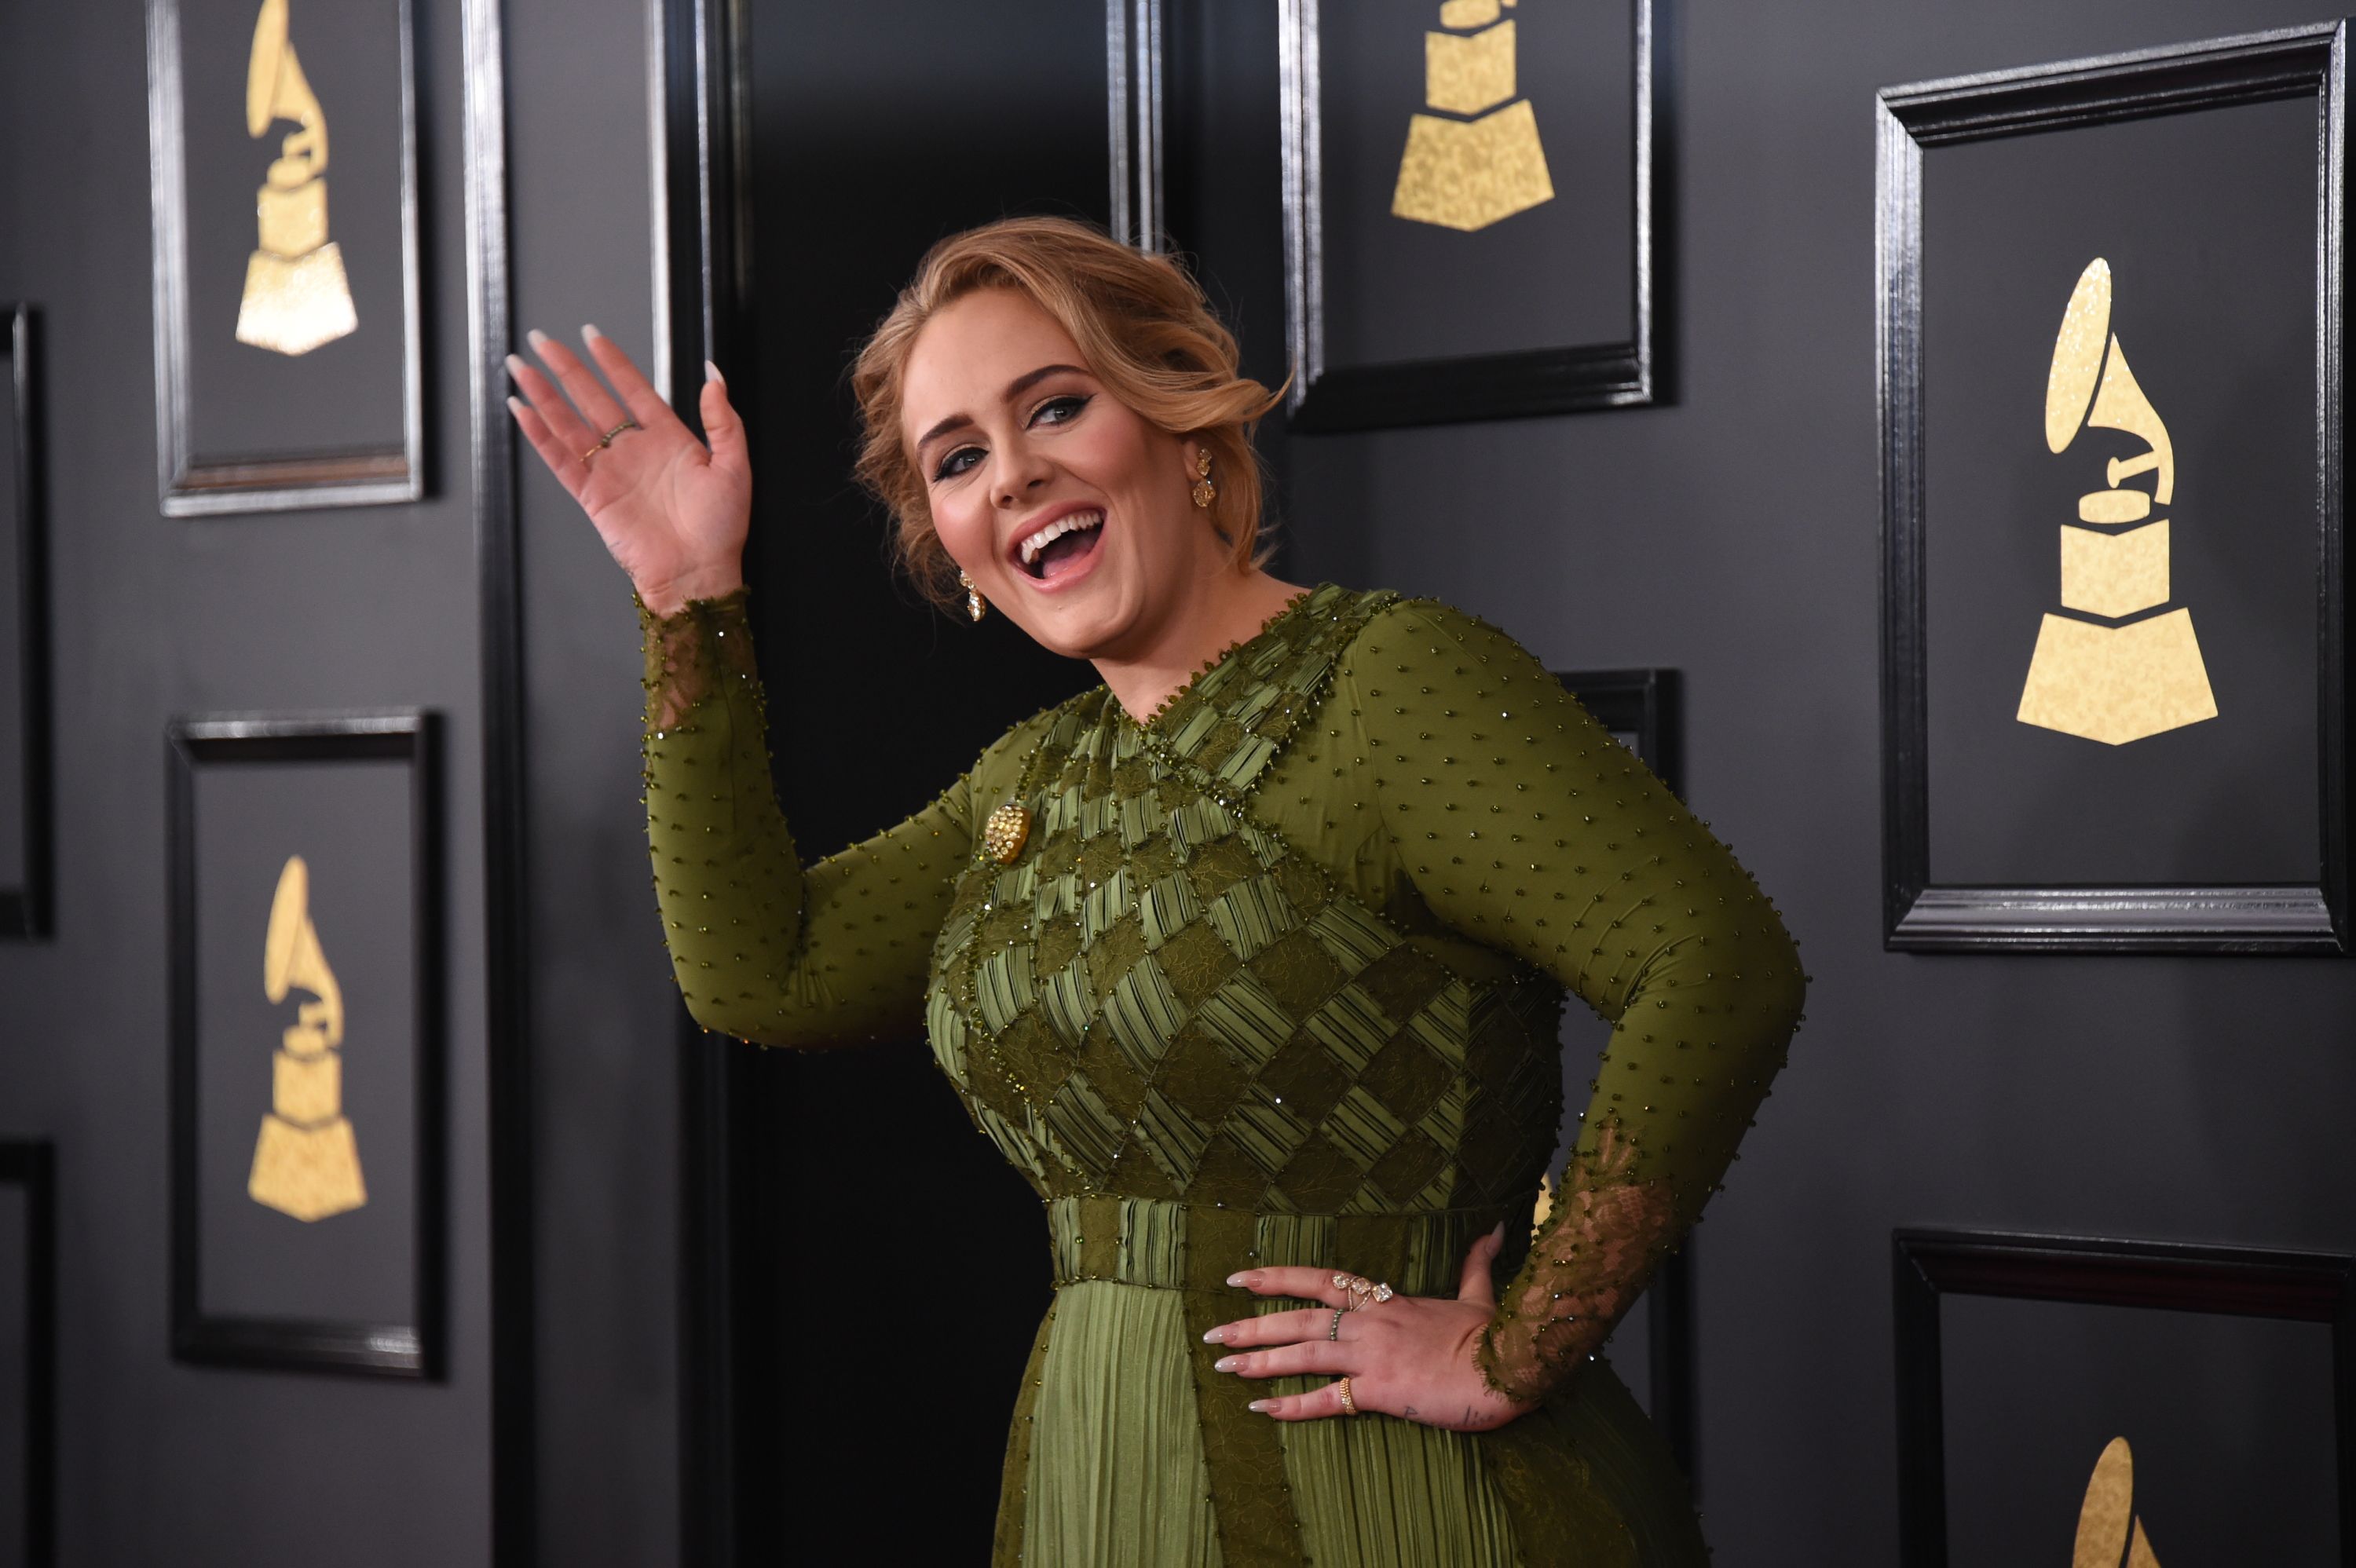 Adele on the Red Carpet at the 59TH Annual Grammy Awards at the STAPLES Center in Los Angeles, United States | Photo: Phil McCarten/CBS via Getty Images